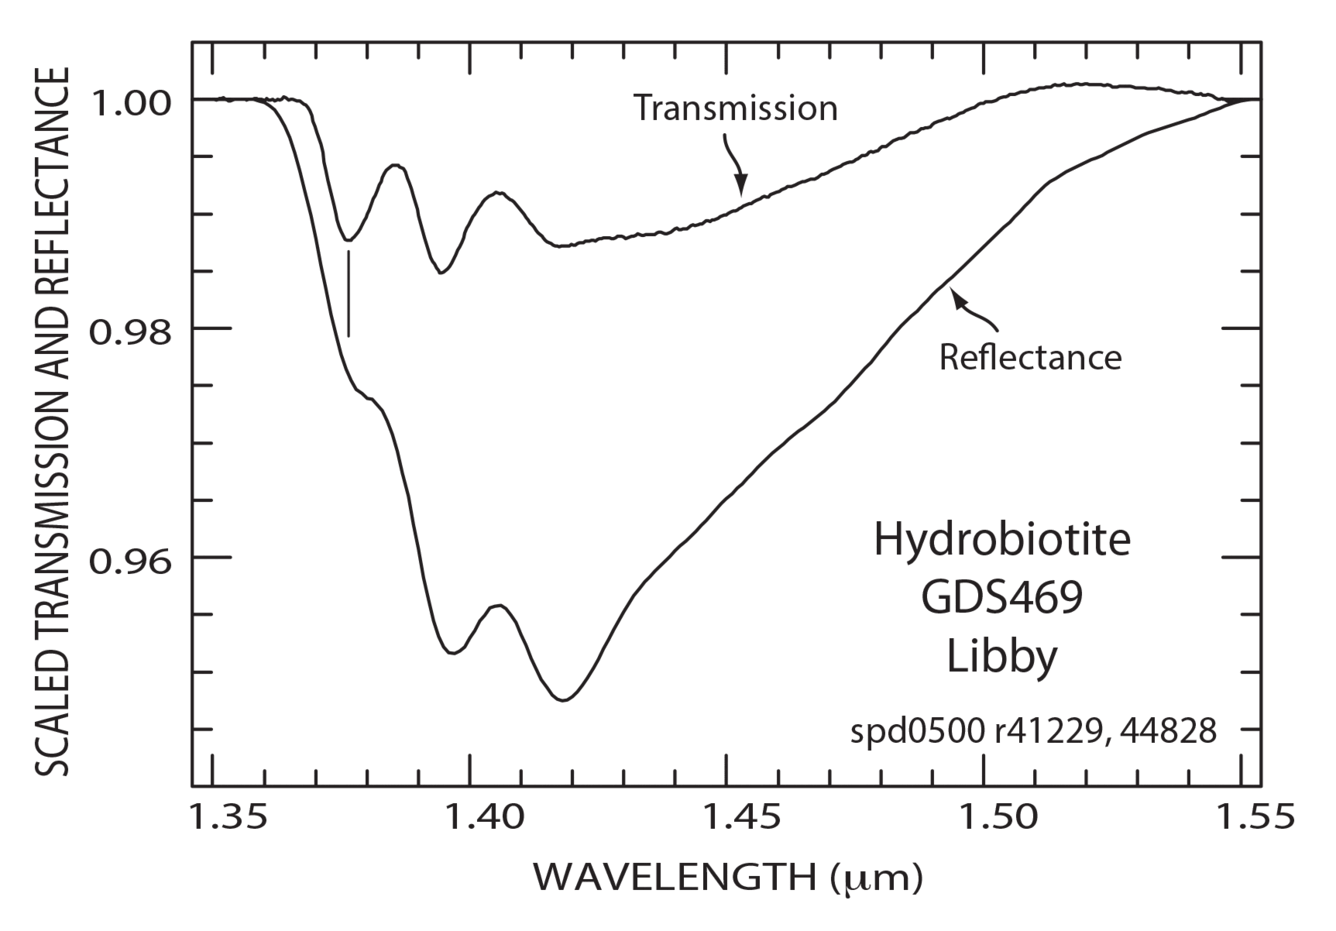 Comparison of  transmission and reflectance of unexpanded Libby ore.